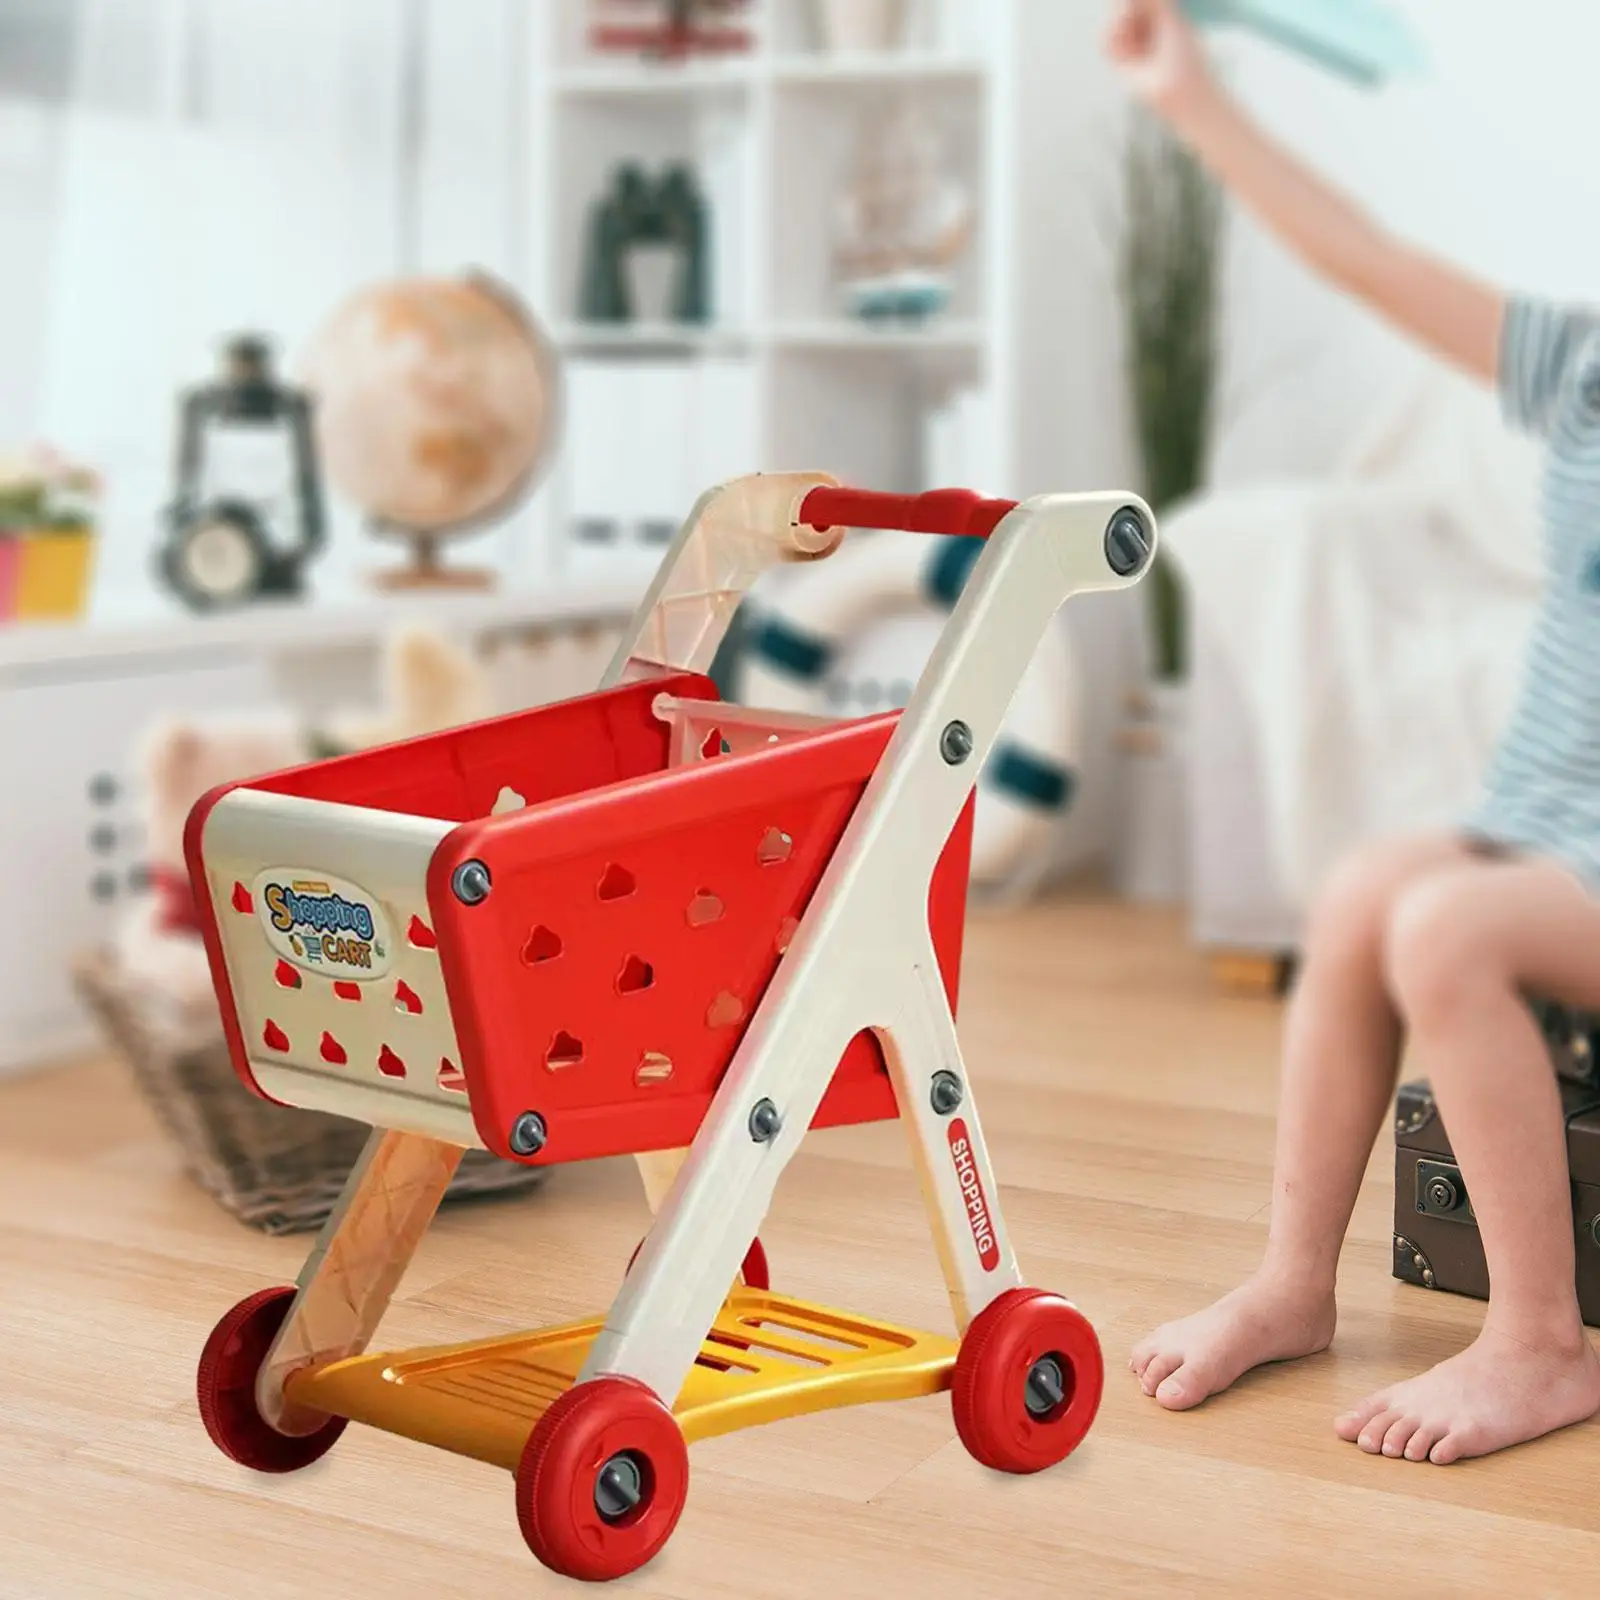 Mini Shopping Cart Toy Pretend Play Mart Shopping Cart for Preschool Girls and Boys Baby Ages 3 and up Learning Development